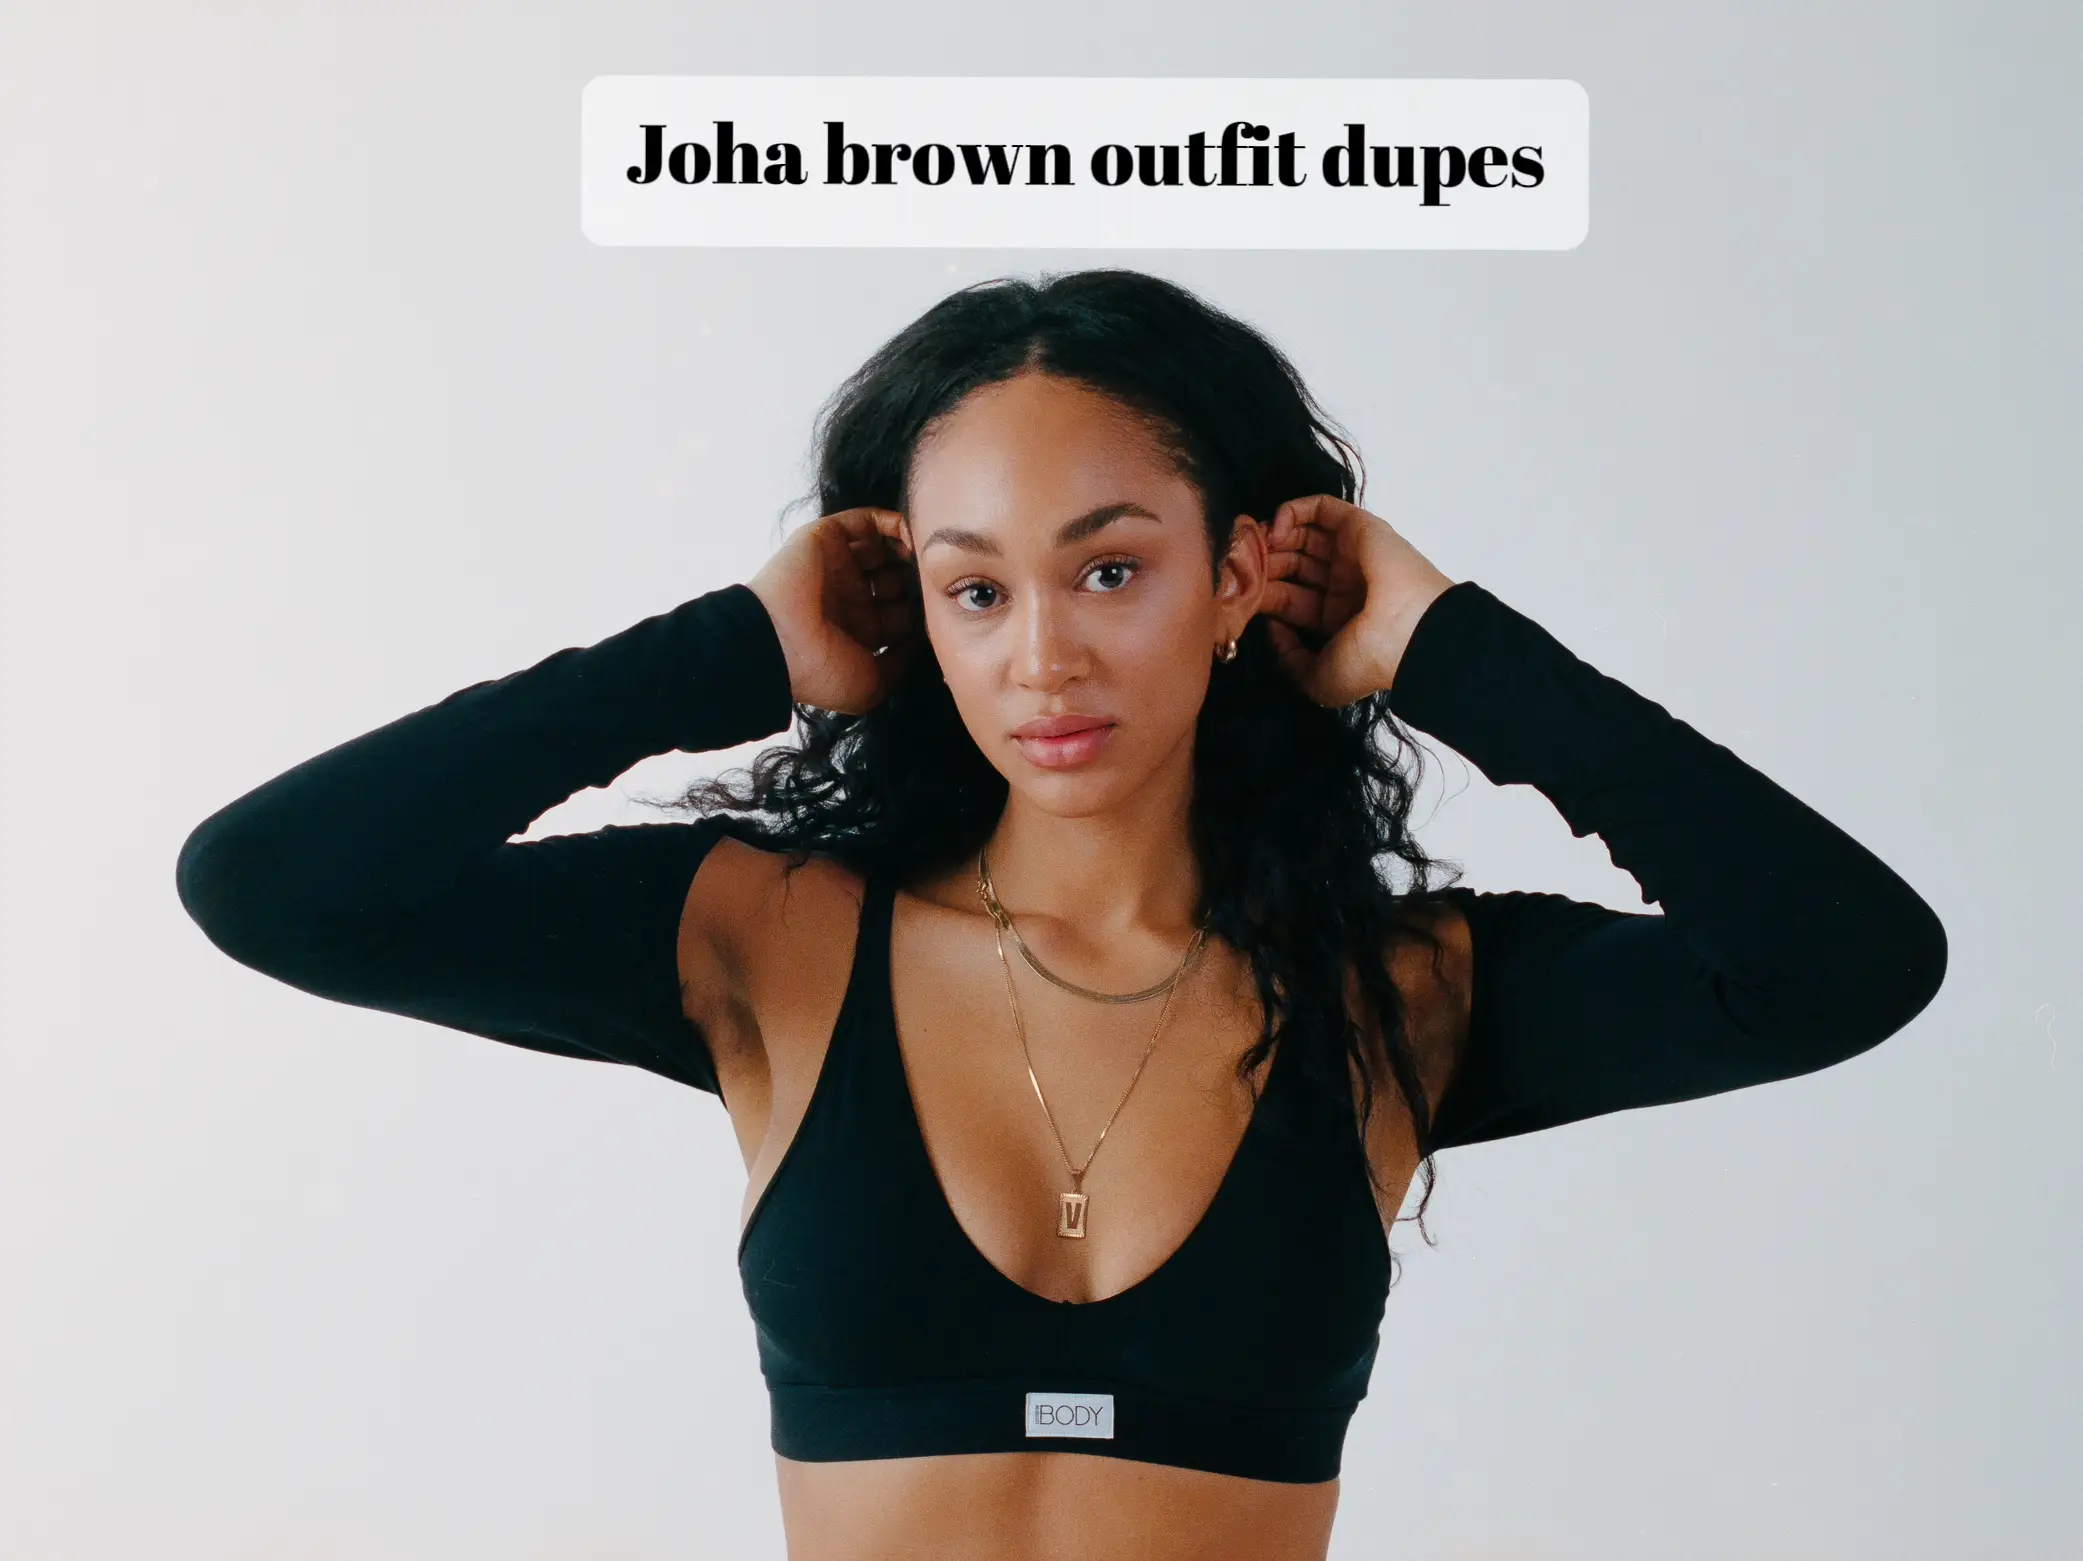 Introducing the Sports legging and Sports bra from Joah Brown. The